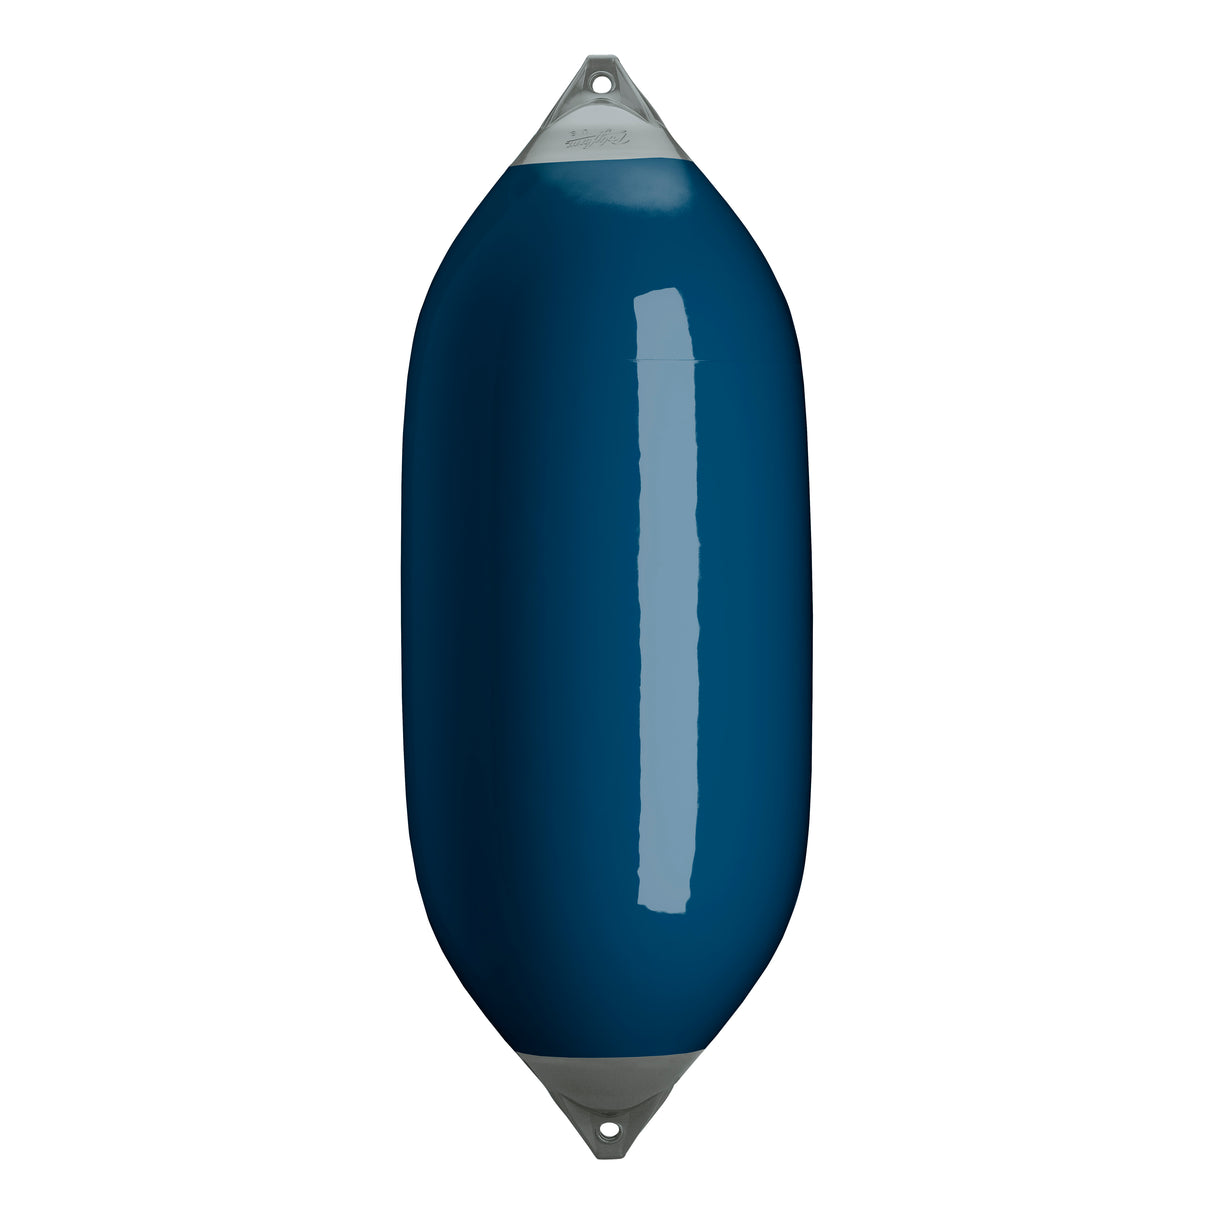 Catalina Blue boat fender with Grey-Top, Polyform F-13